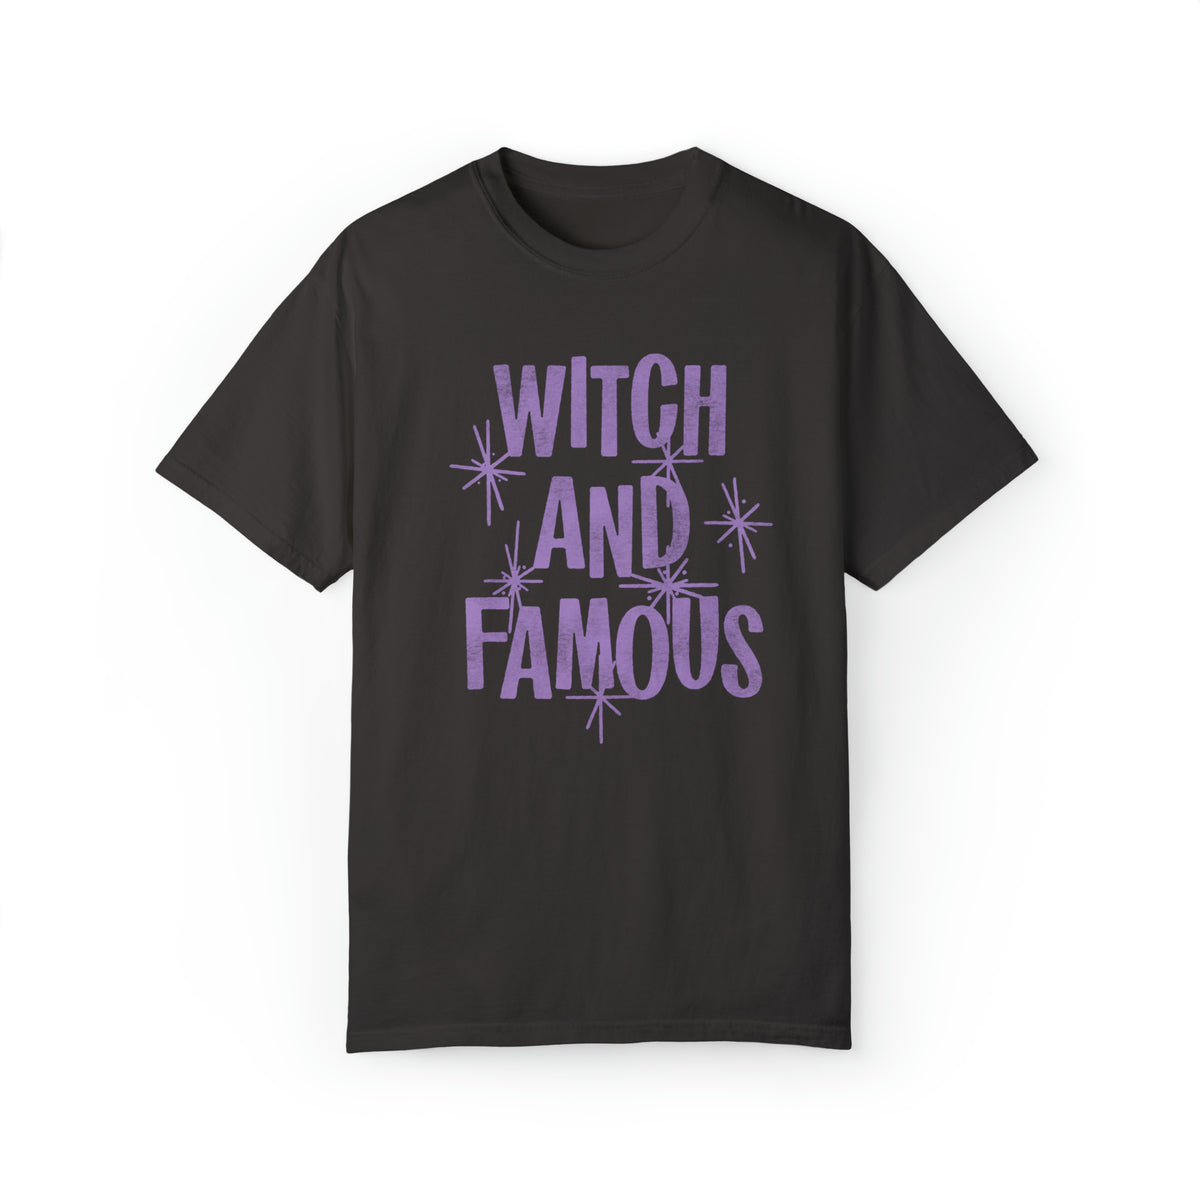 Witch and Famous Comfort Colors Unisex Garment-Dyed T-shirt